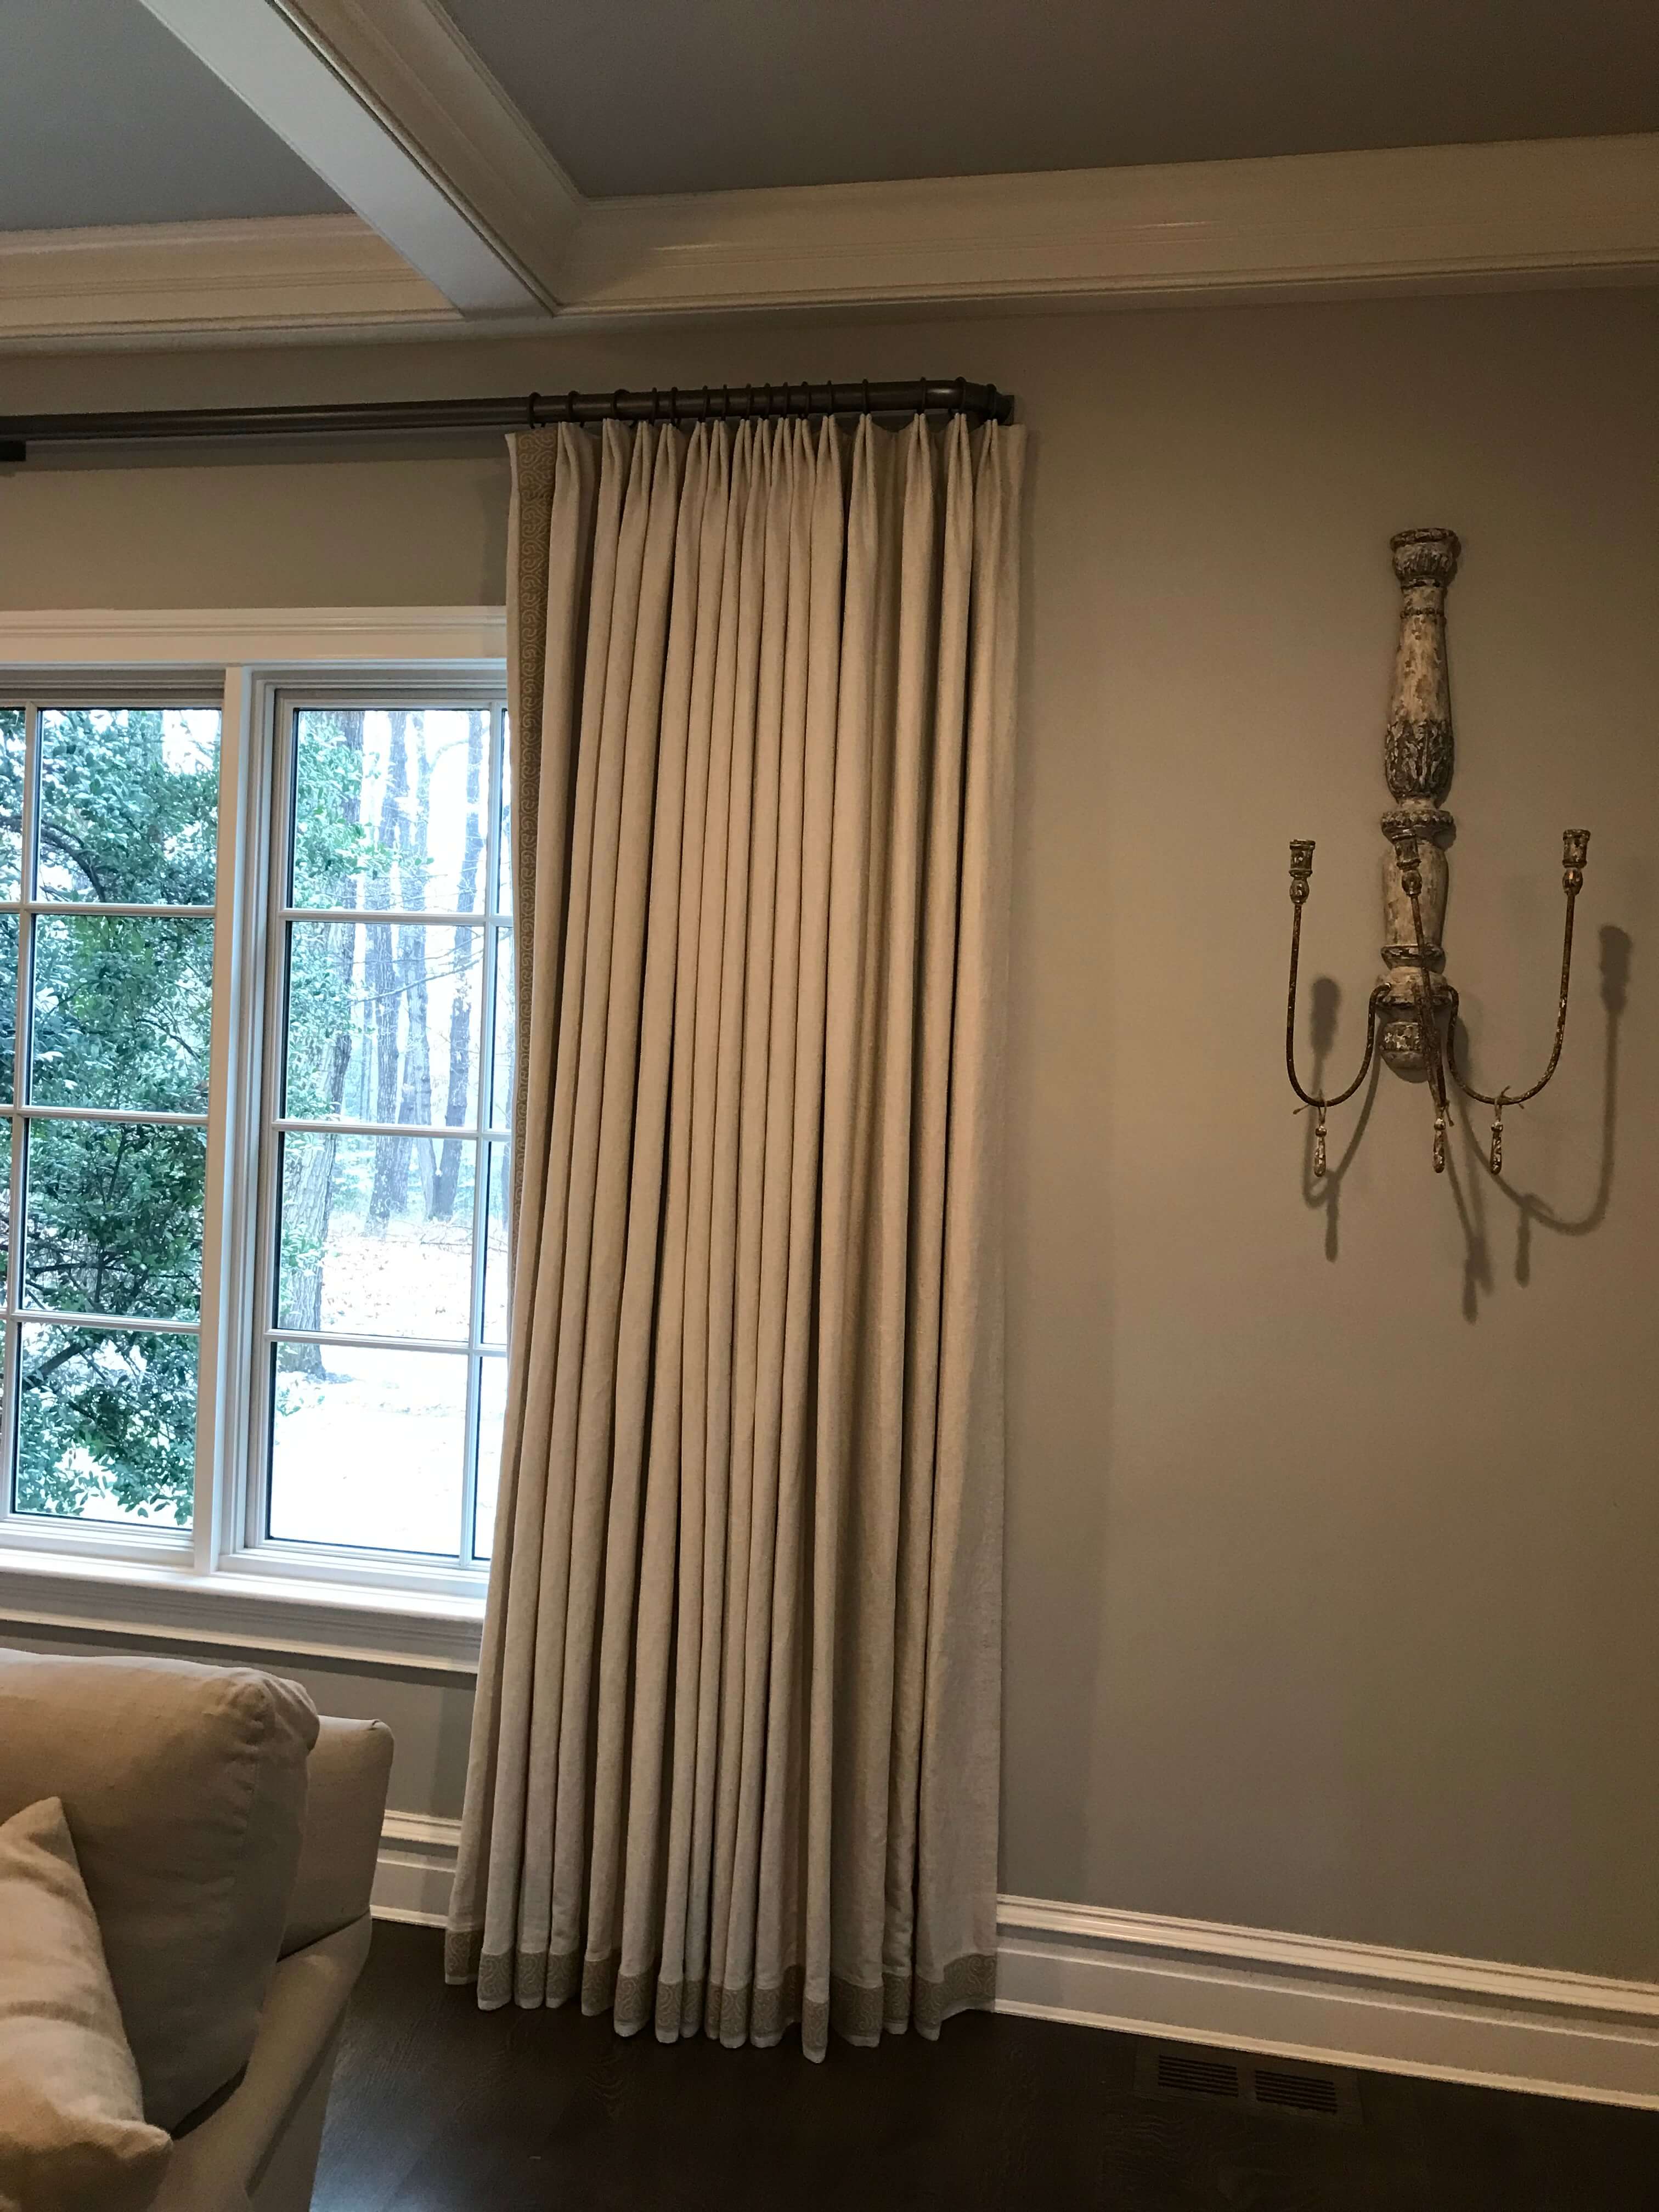 Draperies made out of linen with 3” decorative tape running down the front and across the bottom of the panel. The rod is metal with an elbow bracket which returns back into the wall. This is a very transitional design.